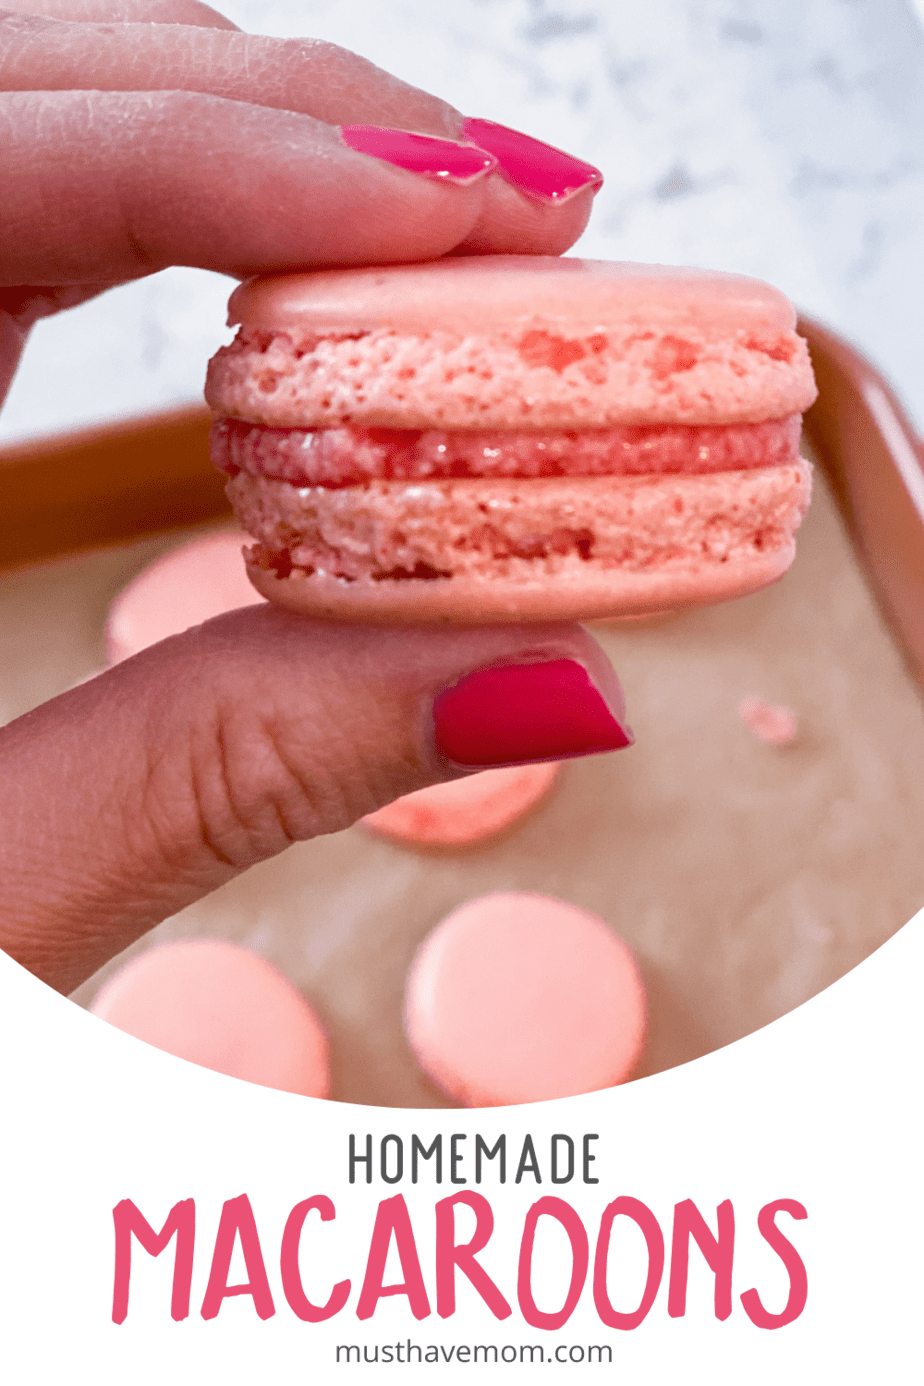 This easy homemade macaroon recipe is full of delicious strawberry flavor in every layer. Freeze-dried strawberries give it an amazing flavor.